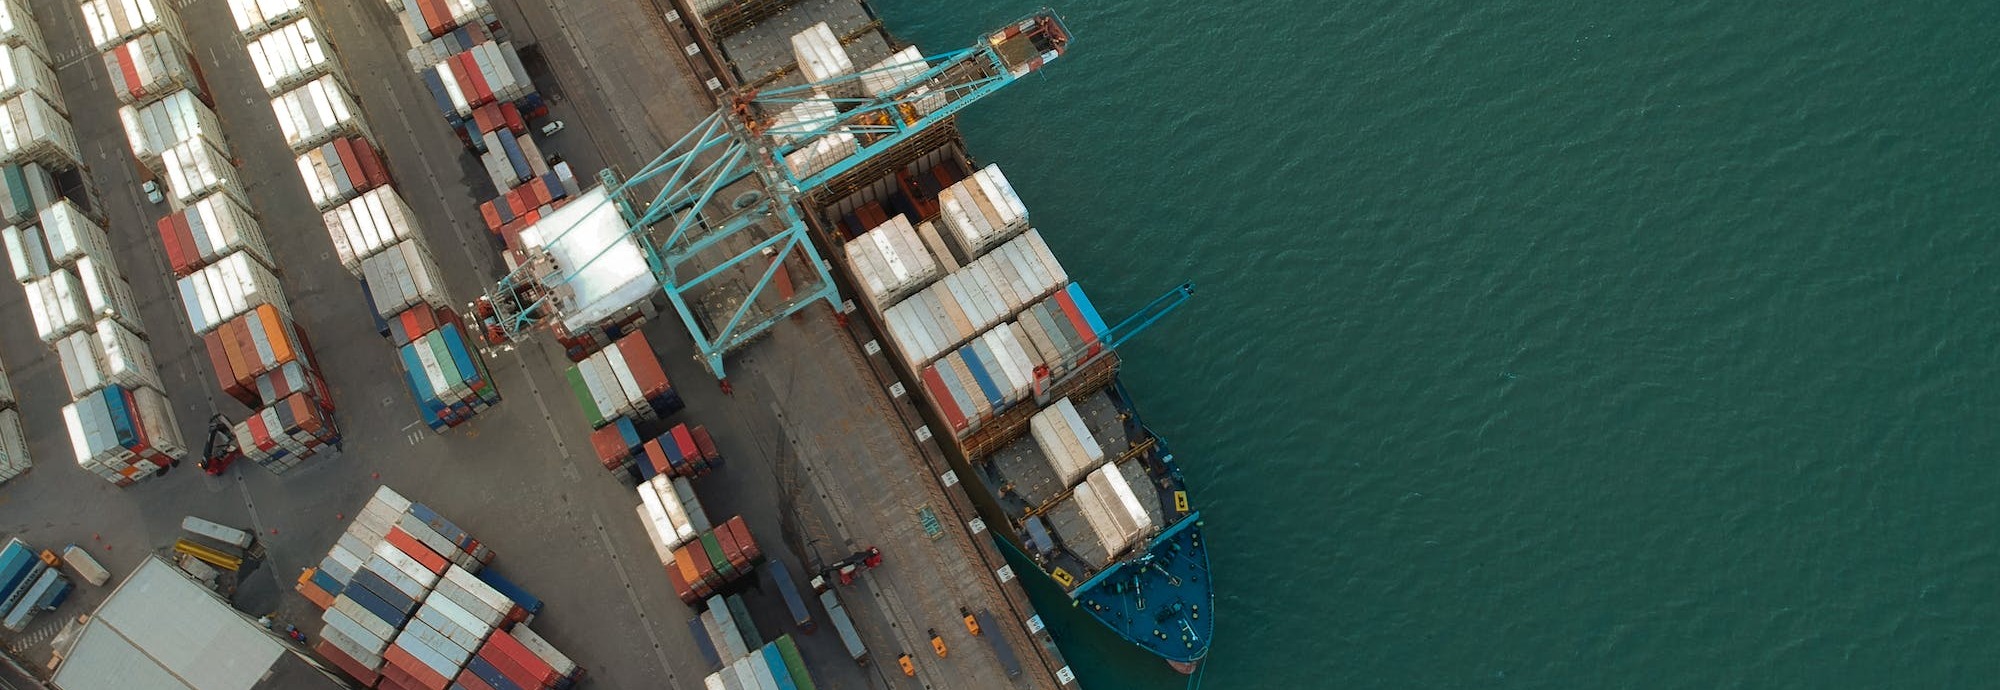 Container ship from above 2.9-1